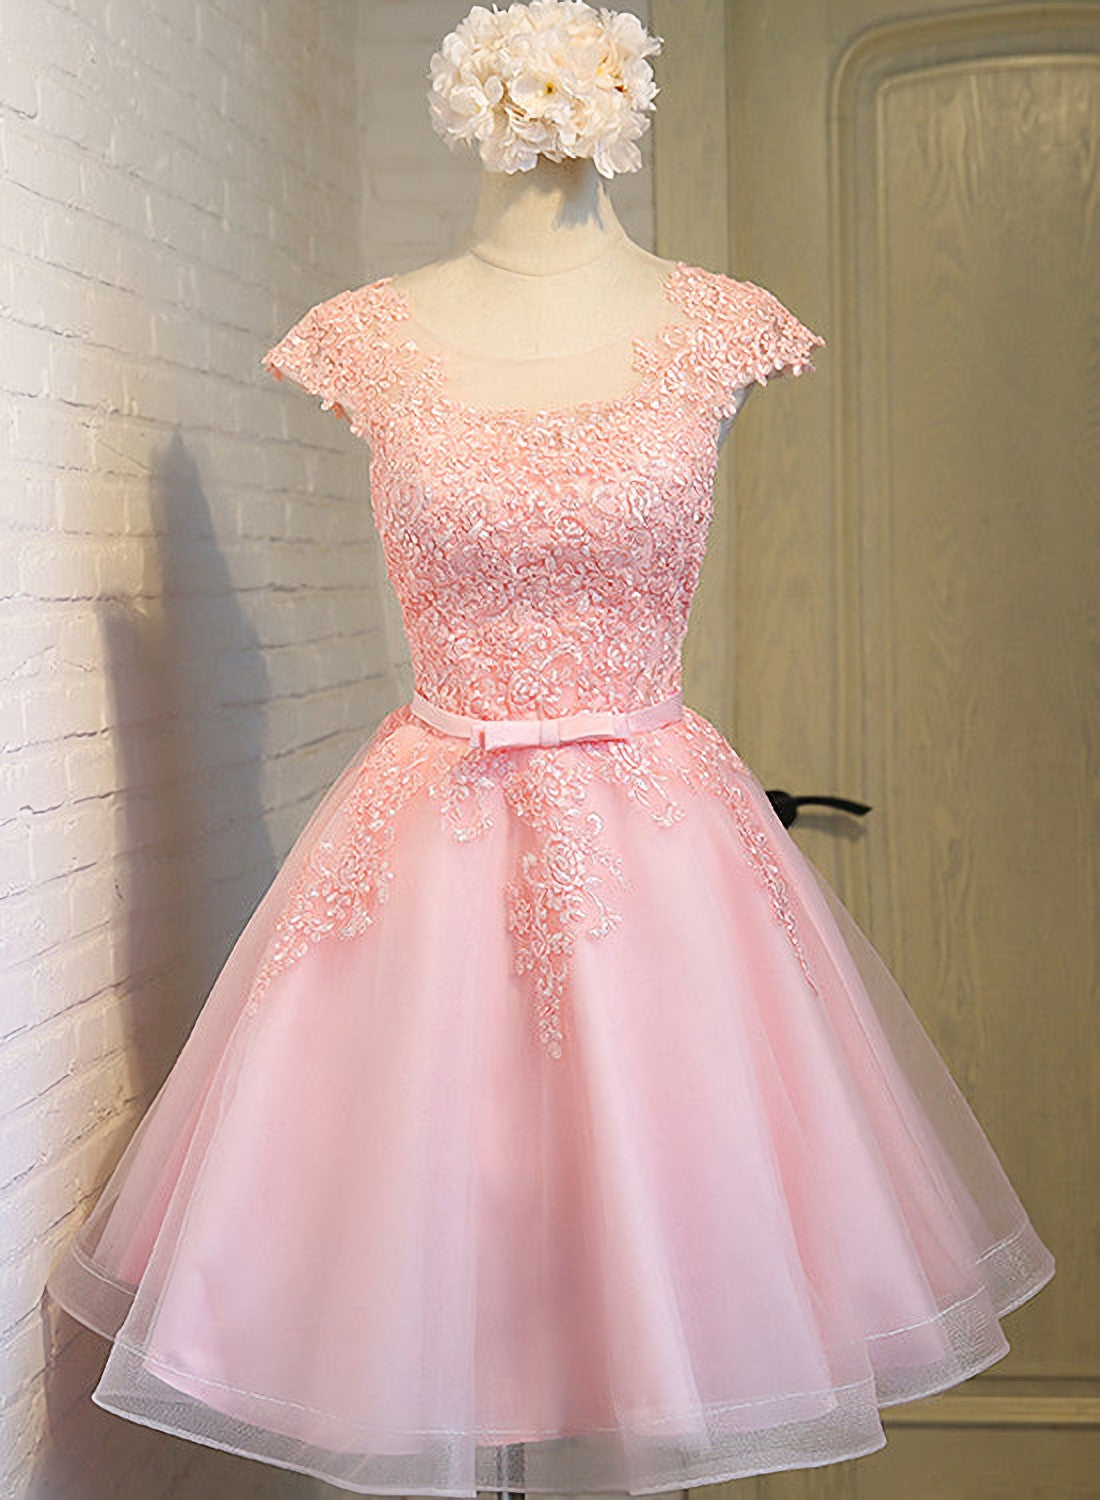 Prom Outfit, Cute Pink Round Neckline Tulle Party Dress, Pink Cap Sleeves Formal Dress